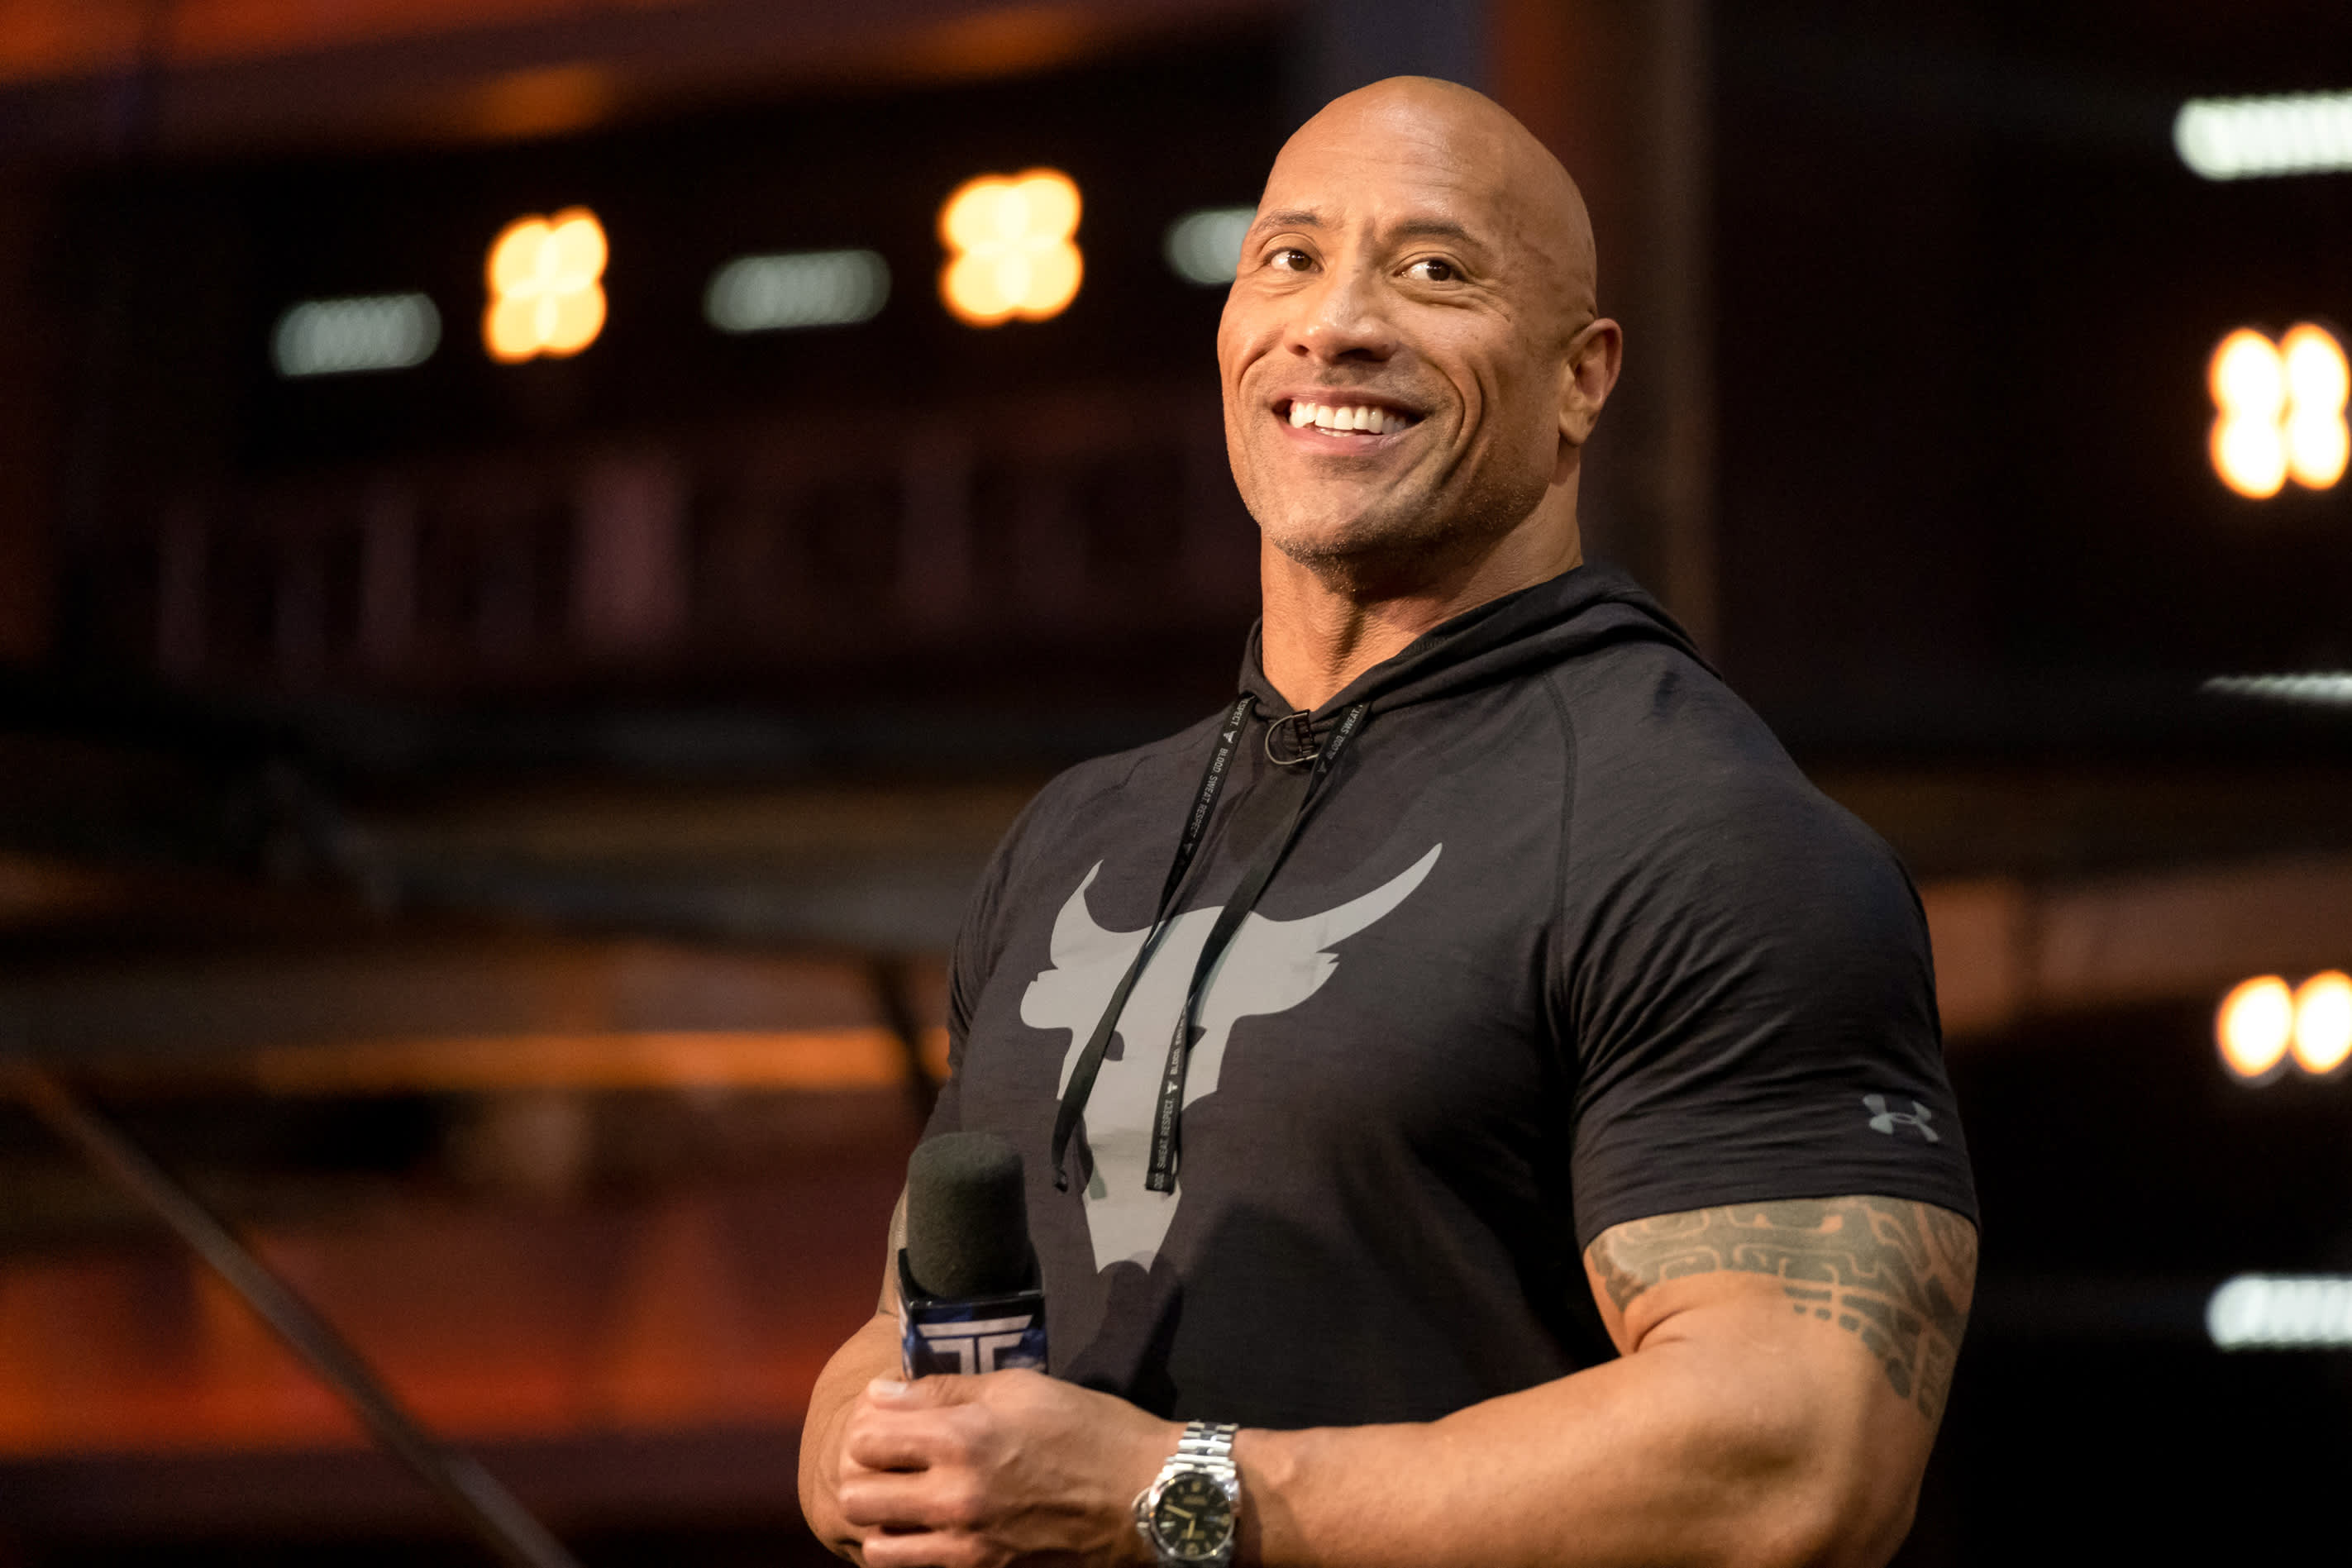 Dwayne The Rock Johnson on why he changed his daily routine to do less